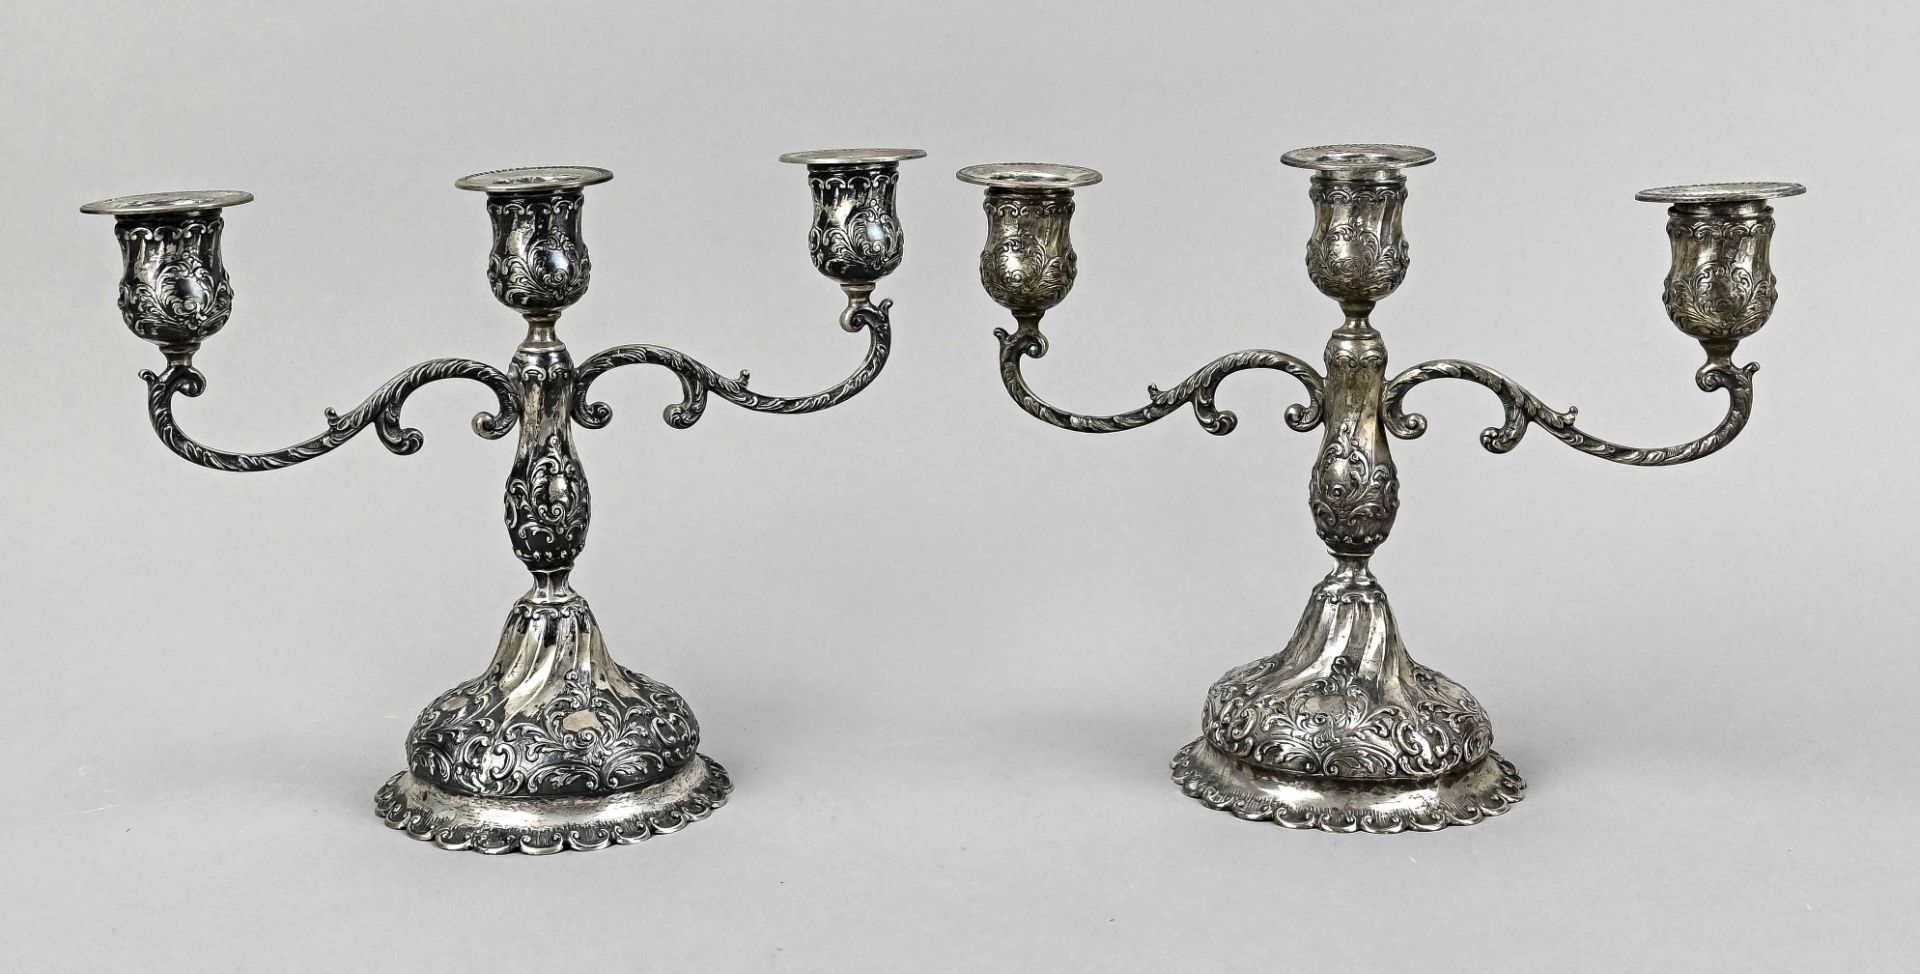 Pair of candlesticks, silver 800, 3-lights each, roccaille, grommets added later, all hallmarked wi - Image 3 of 3